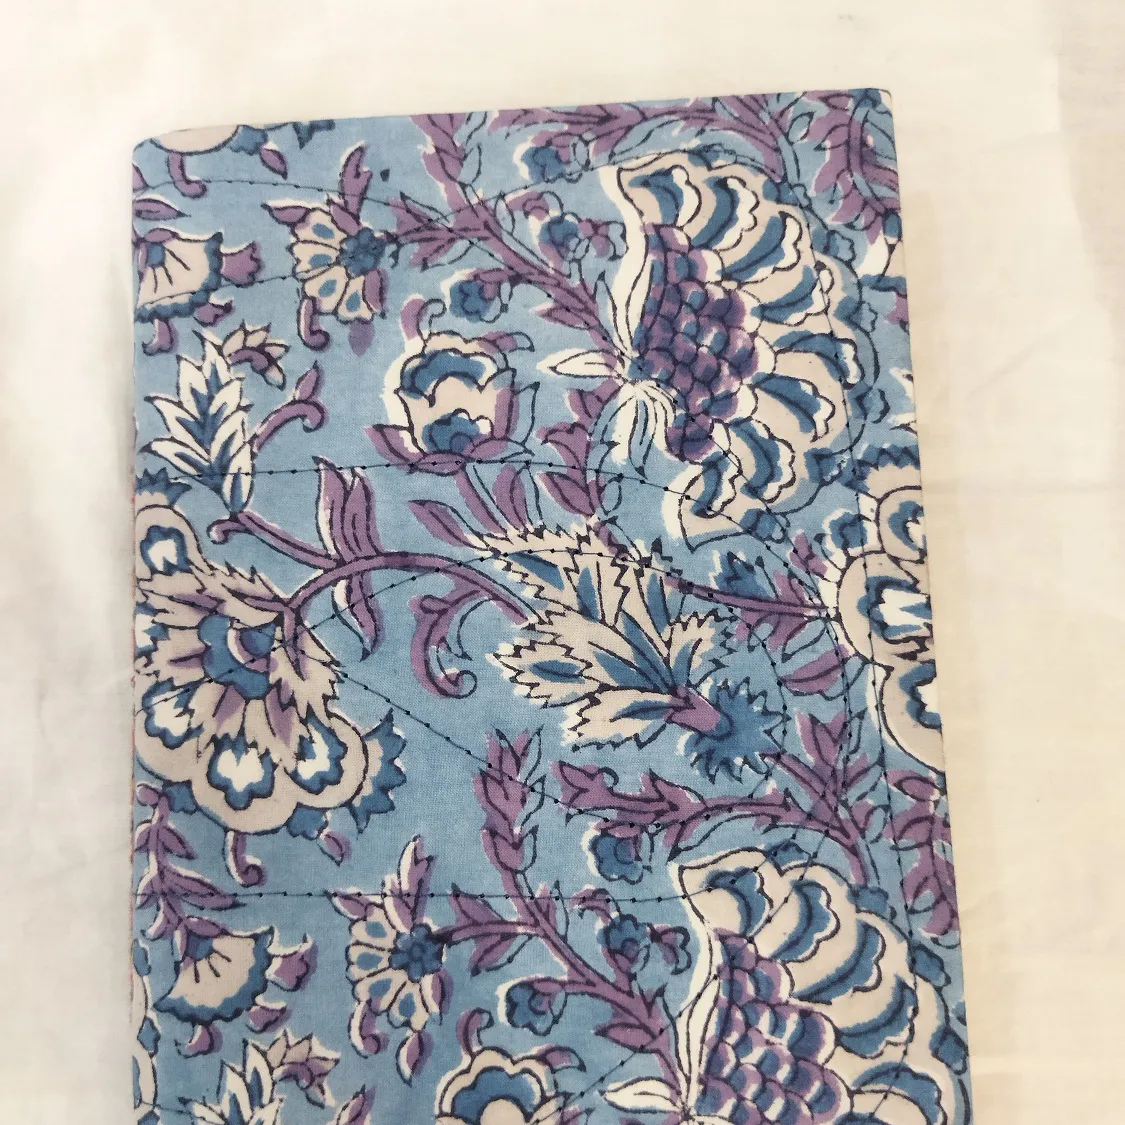 Floral Printed Cover Note Book With Handmade Paper For School, Traveling & Office, Handmade Printed Dairy journals